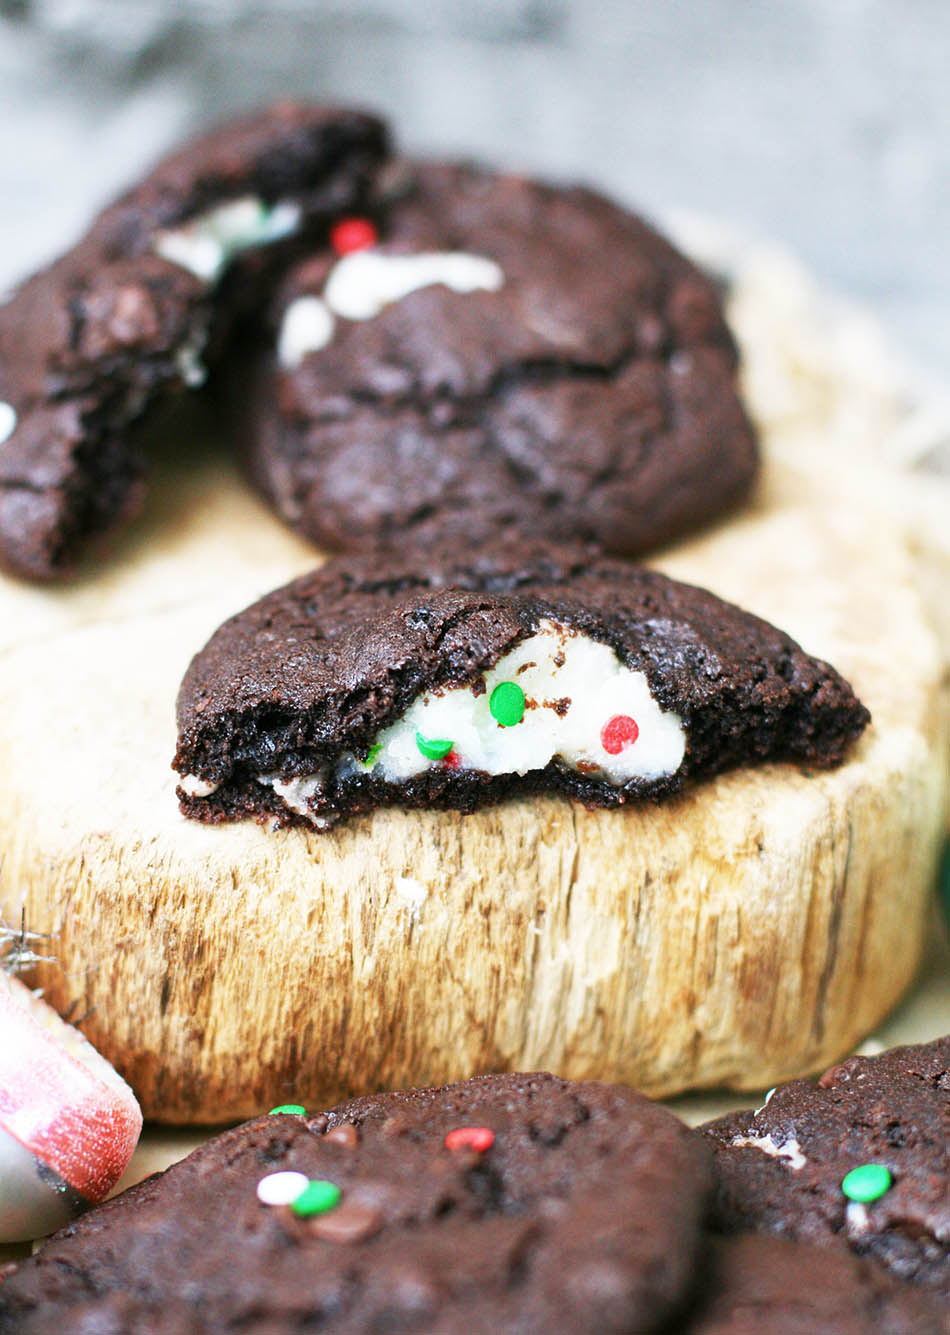 Cream cheese-stuffed chocolate mint cookies: These are over-the-top delicious!